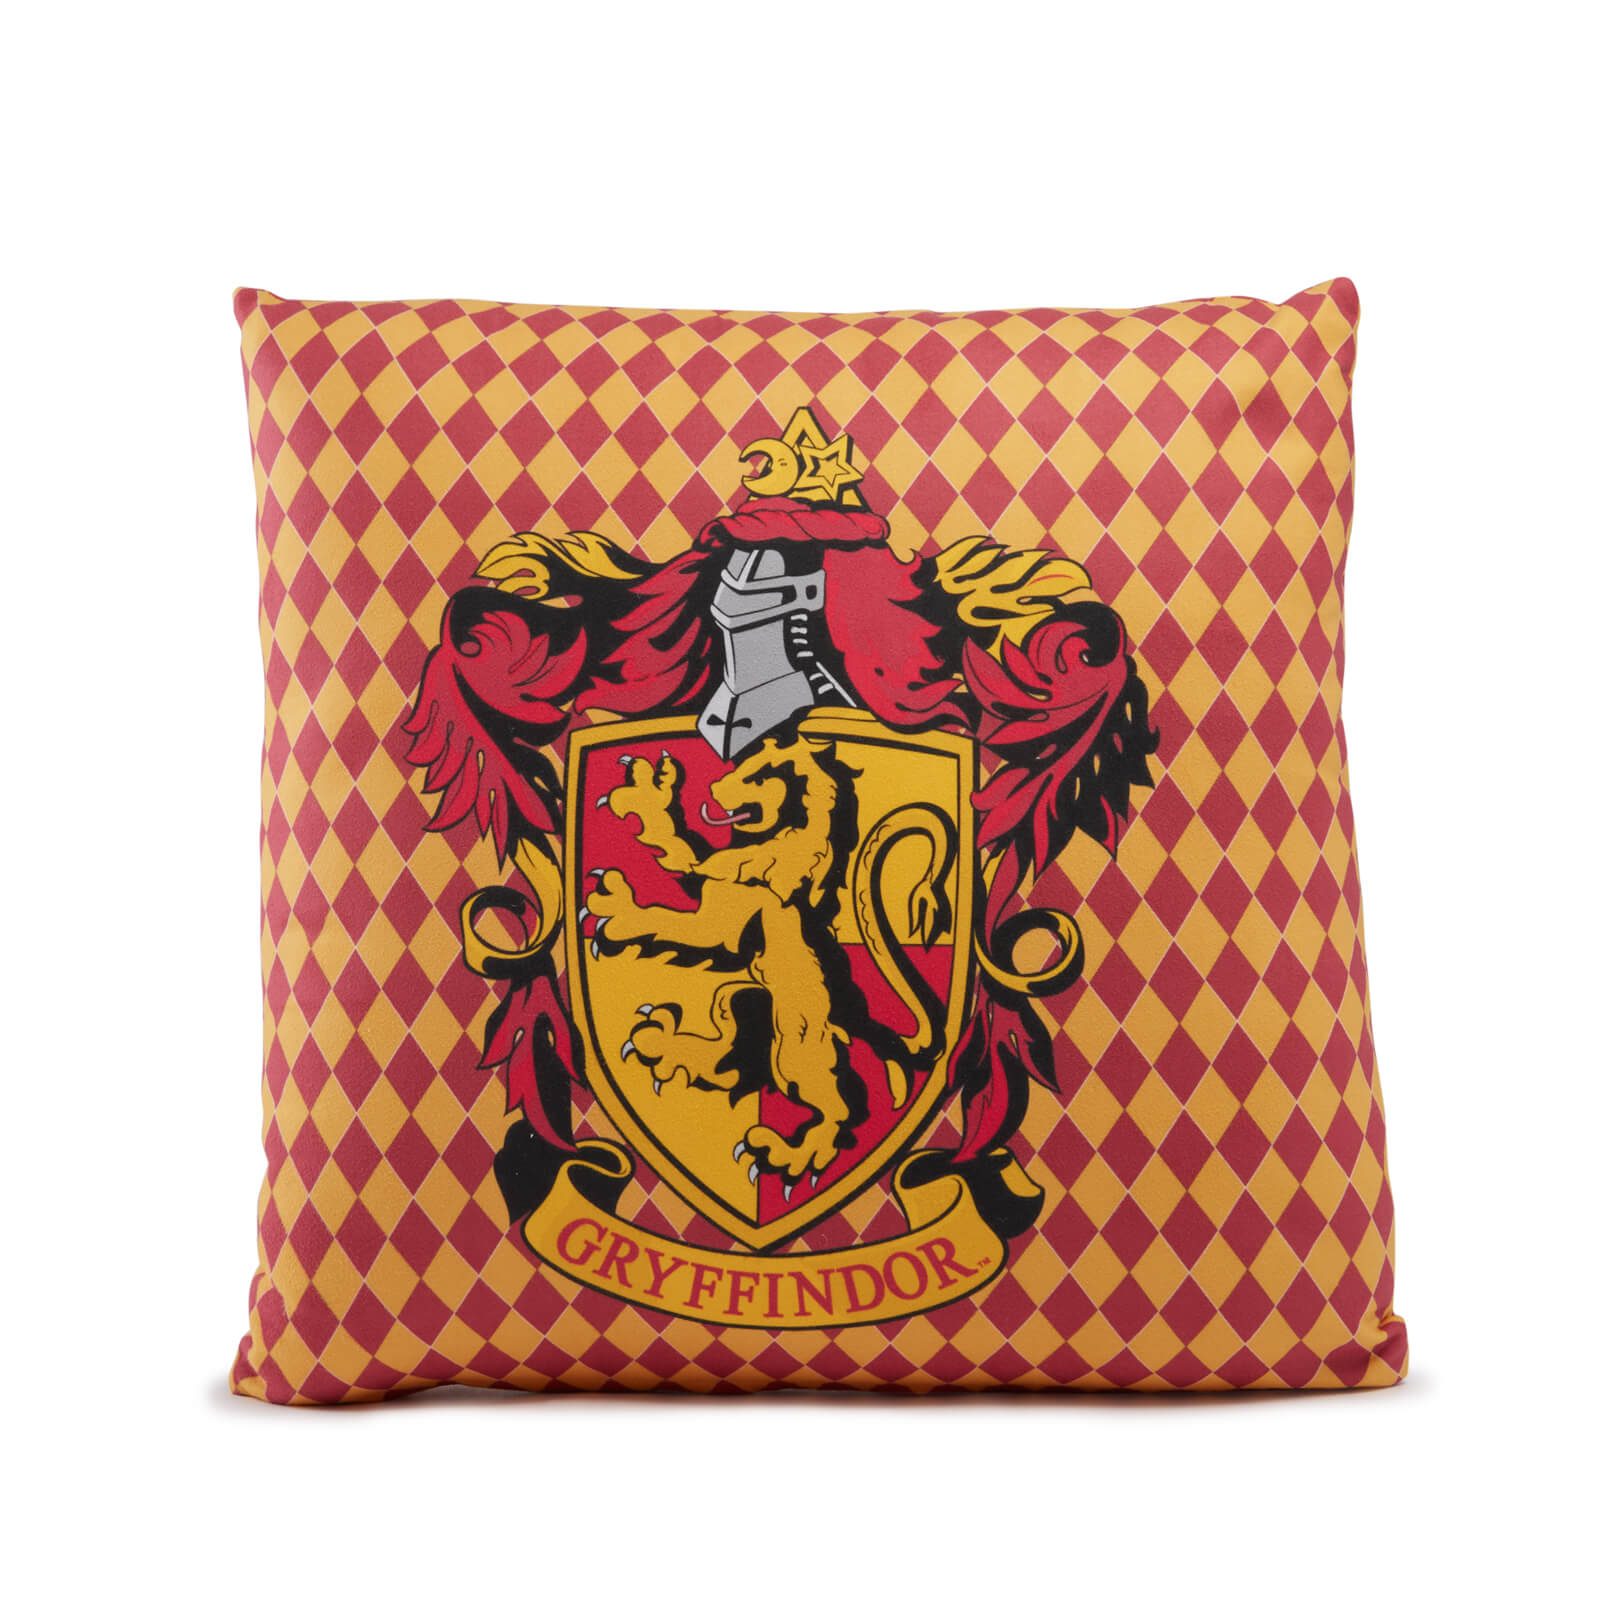 Harry Potter Gryffindor Square Cushion - 40x40cm - Soft Touch